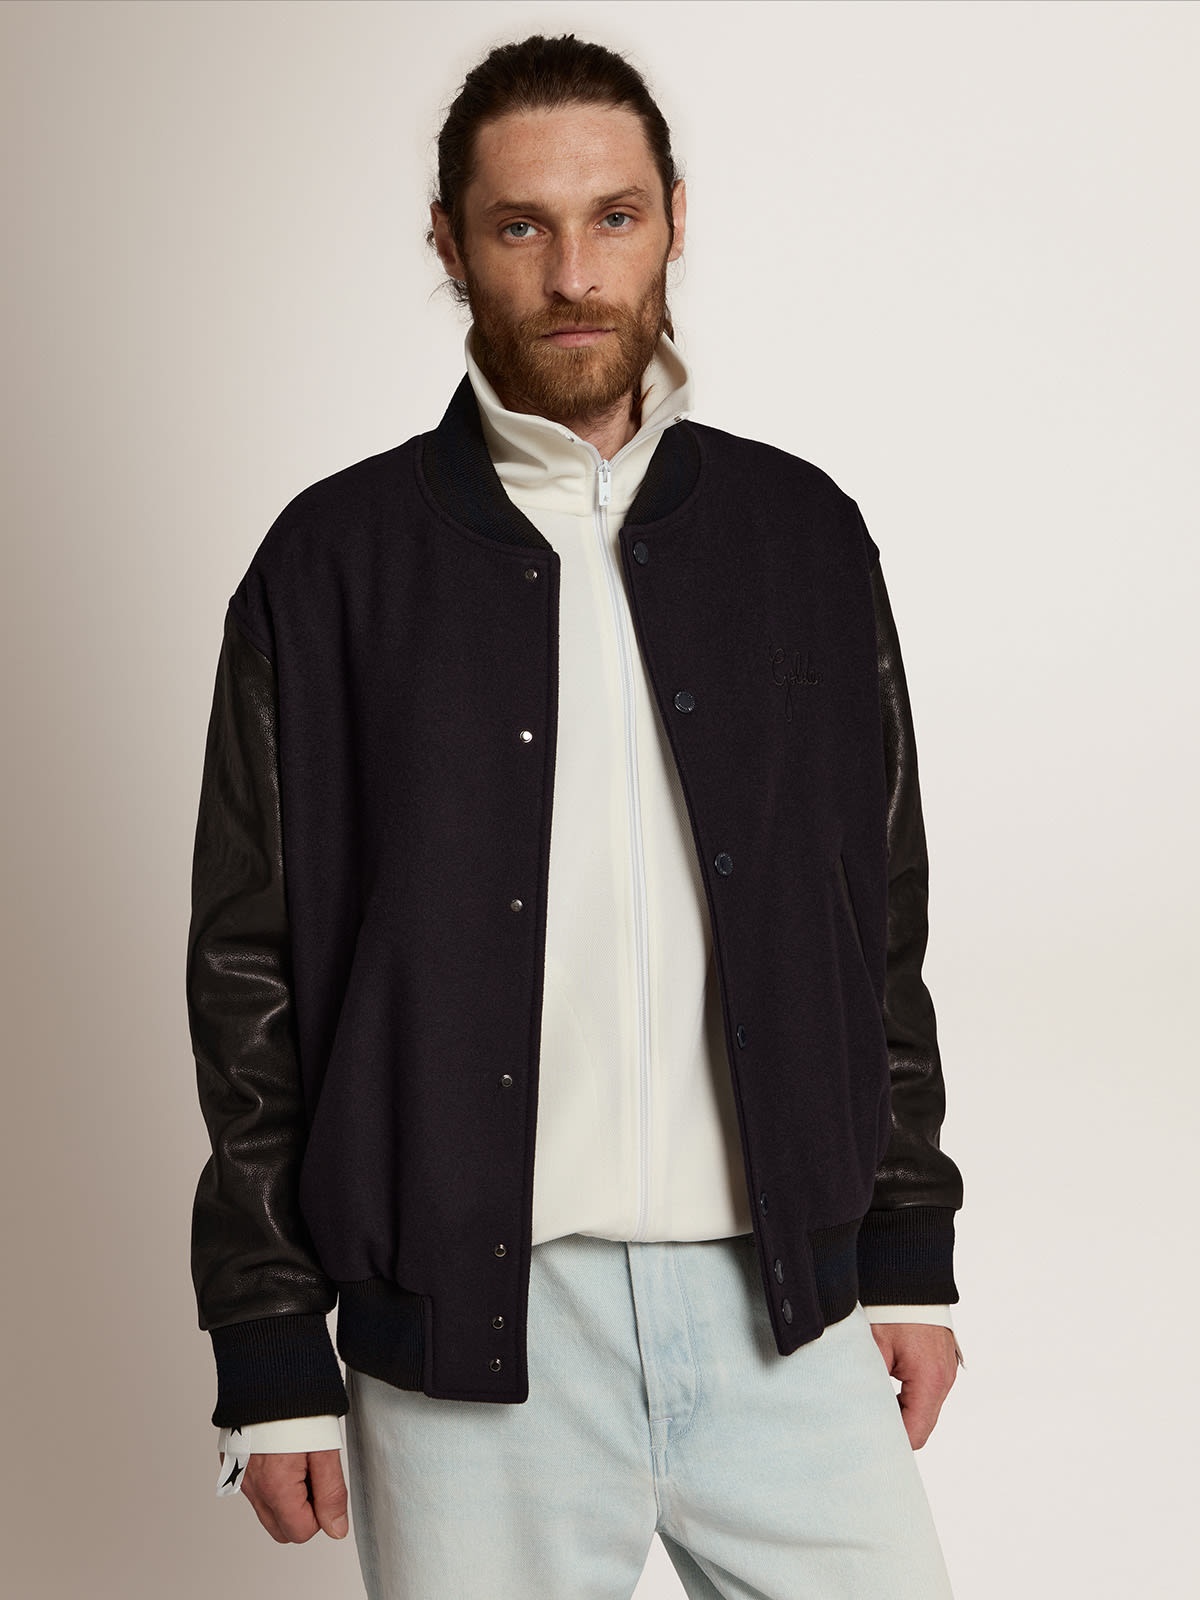 Men's bomber jacket in dark blue wool with leather sleeves - 2